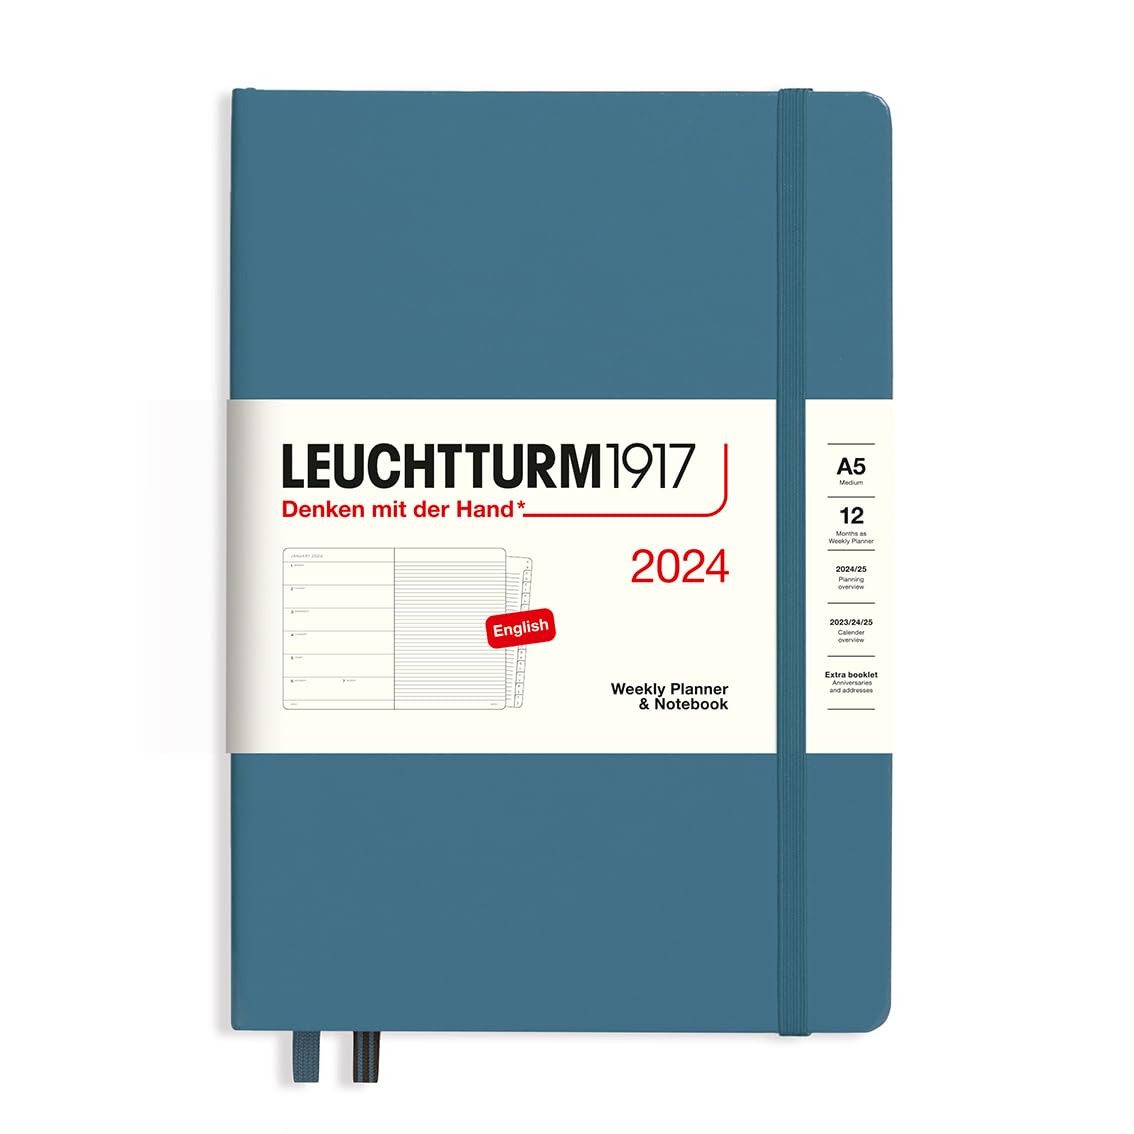 LEUCHTTURM1917 367722 Weekly Planner & Notebook Medium (A5) 2024, with booklet, Stone Blue, English